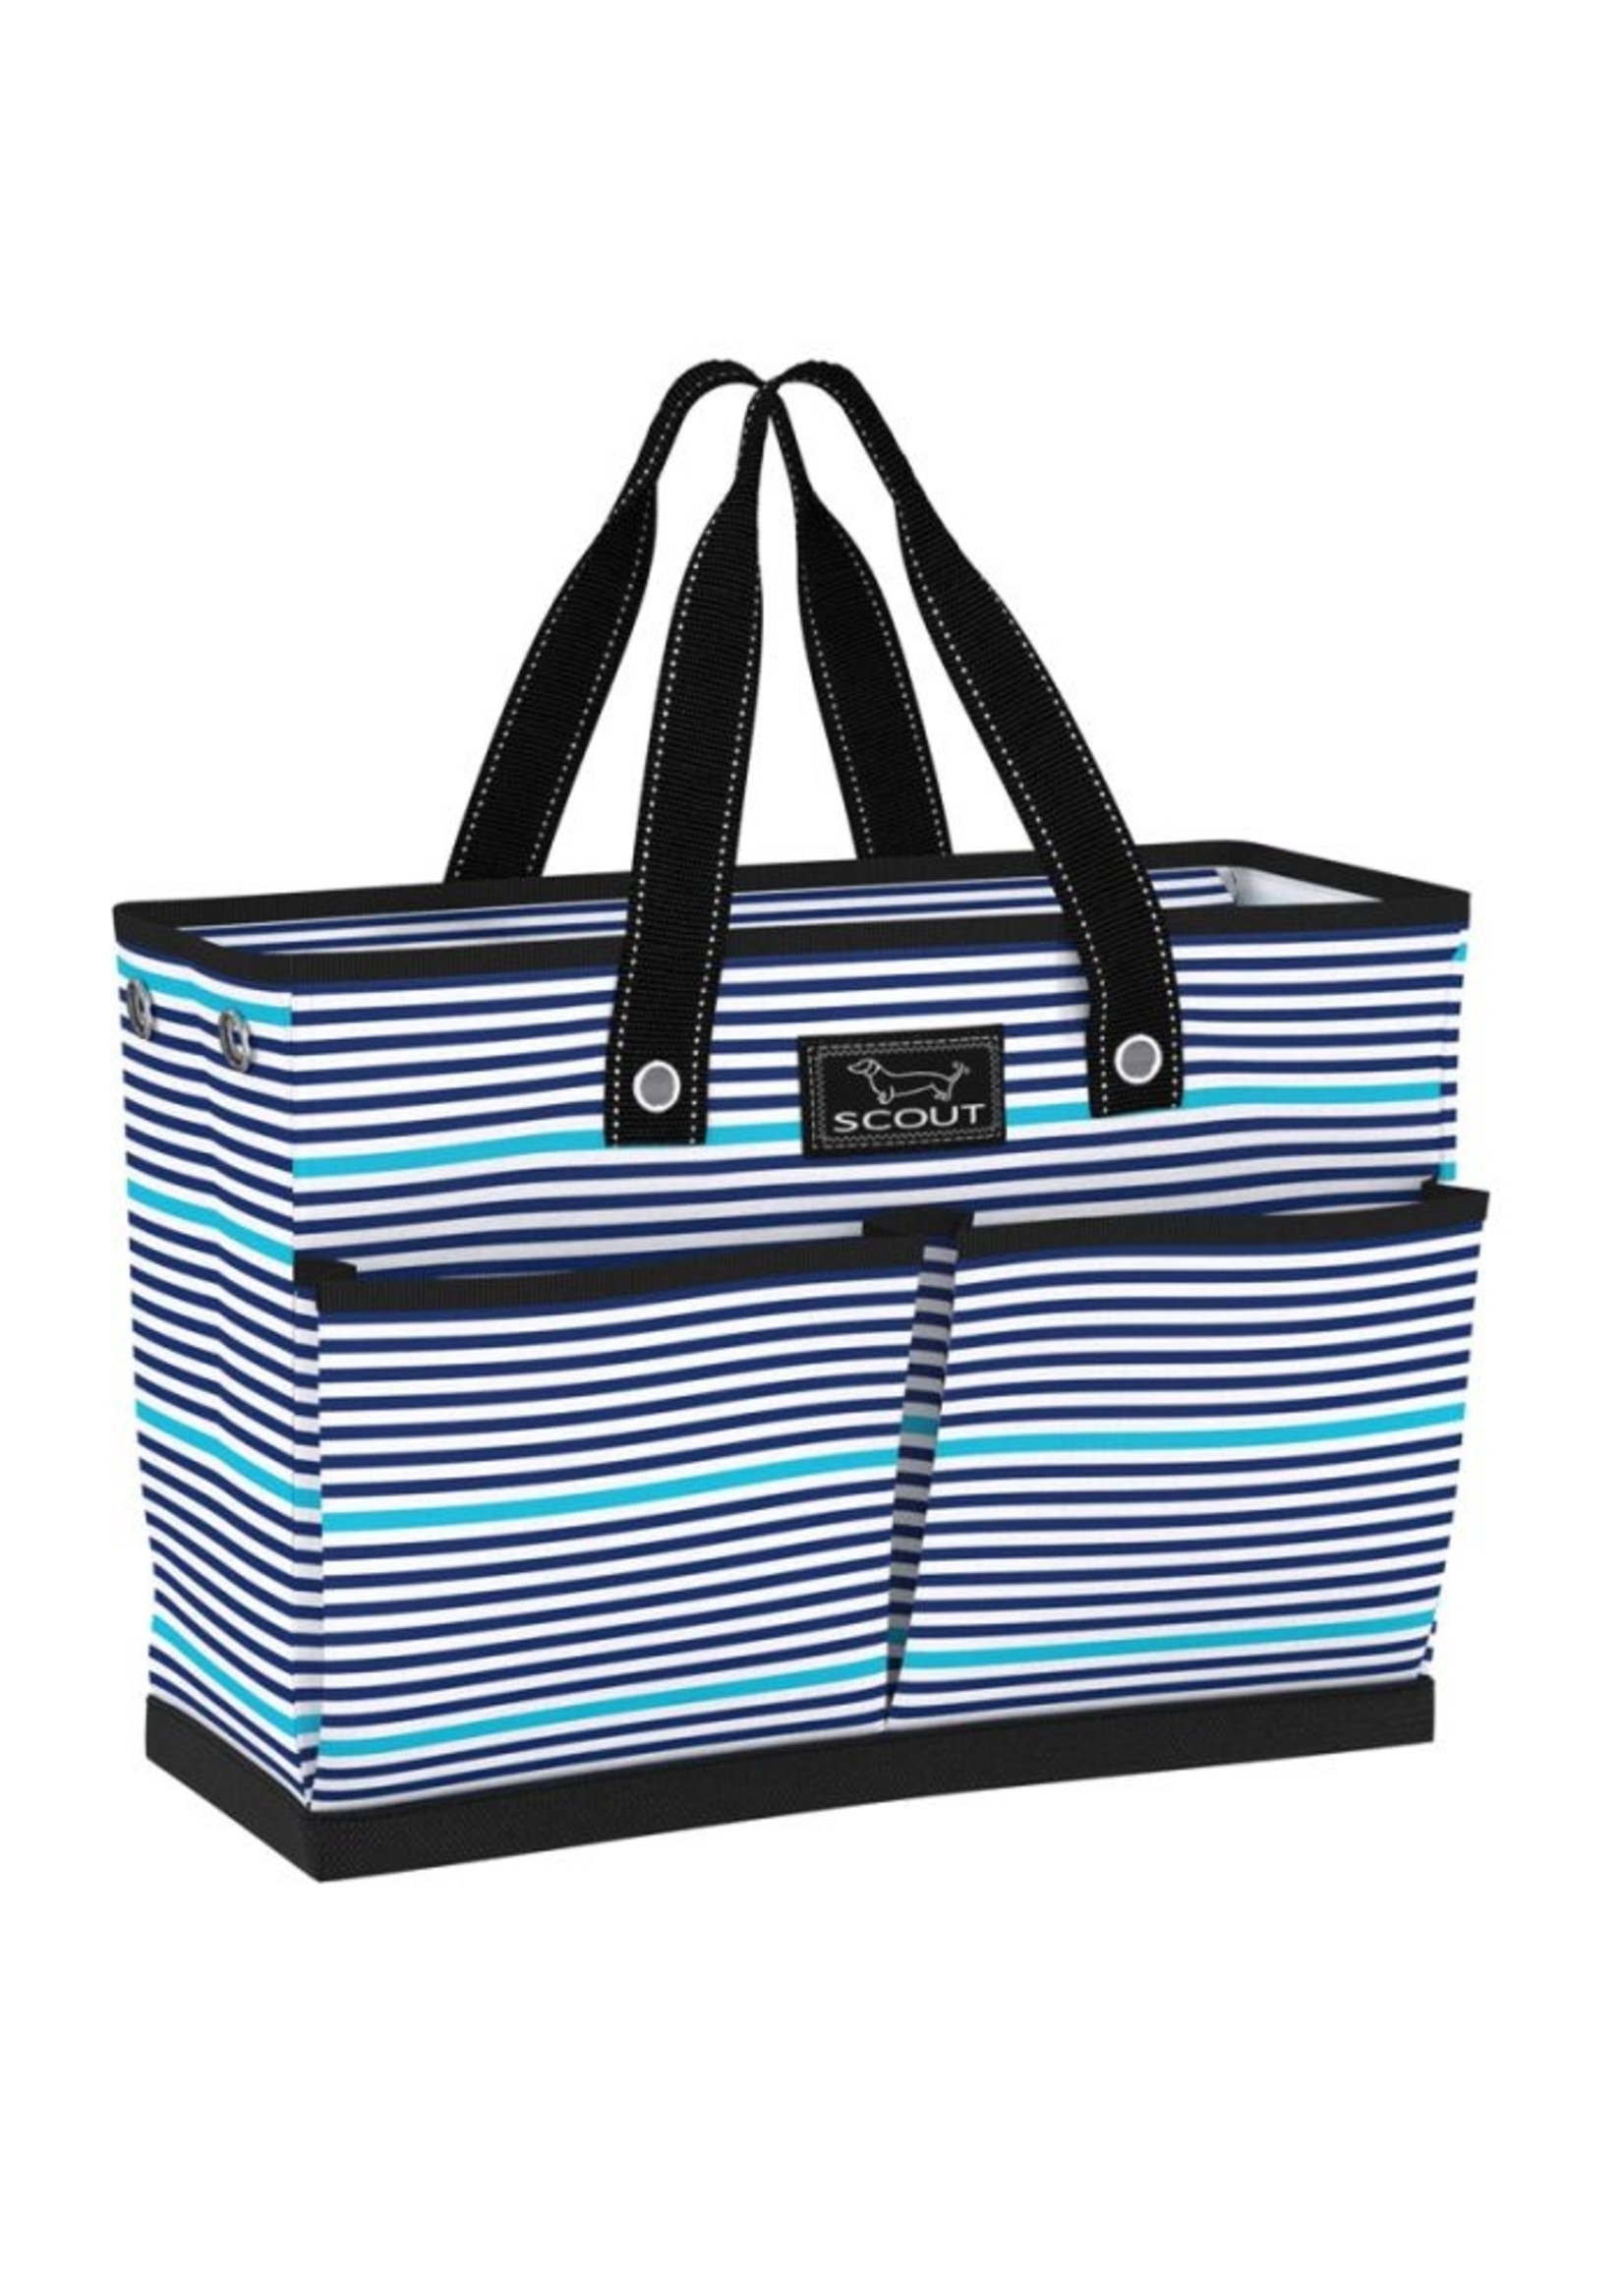 scout by bungalow Scout The BJ Bag Sea Island Stripe